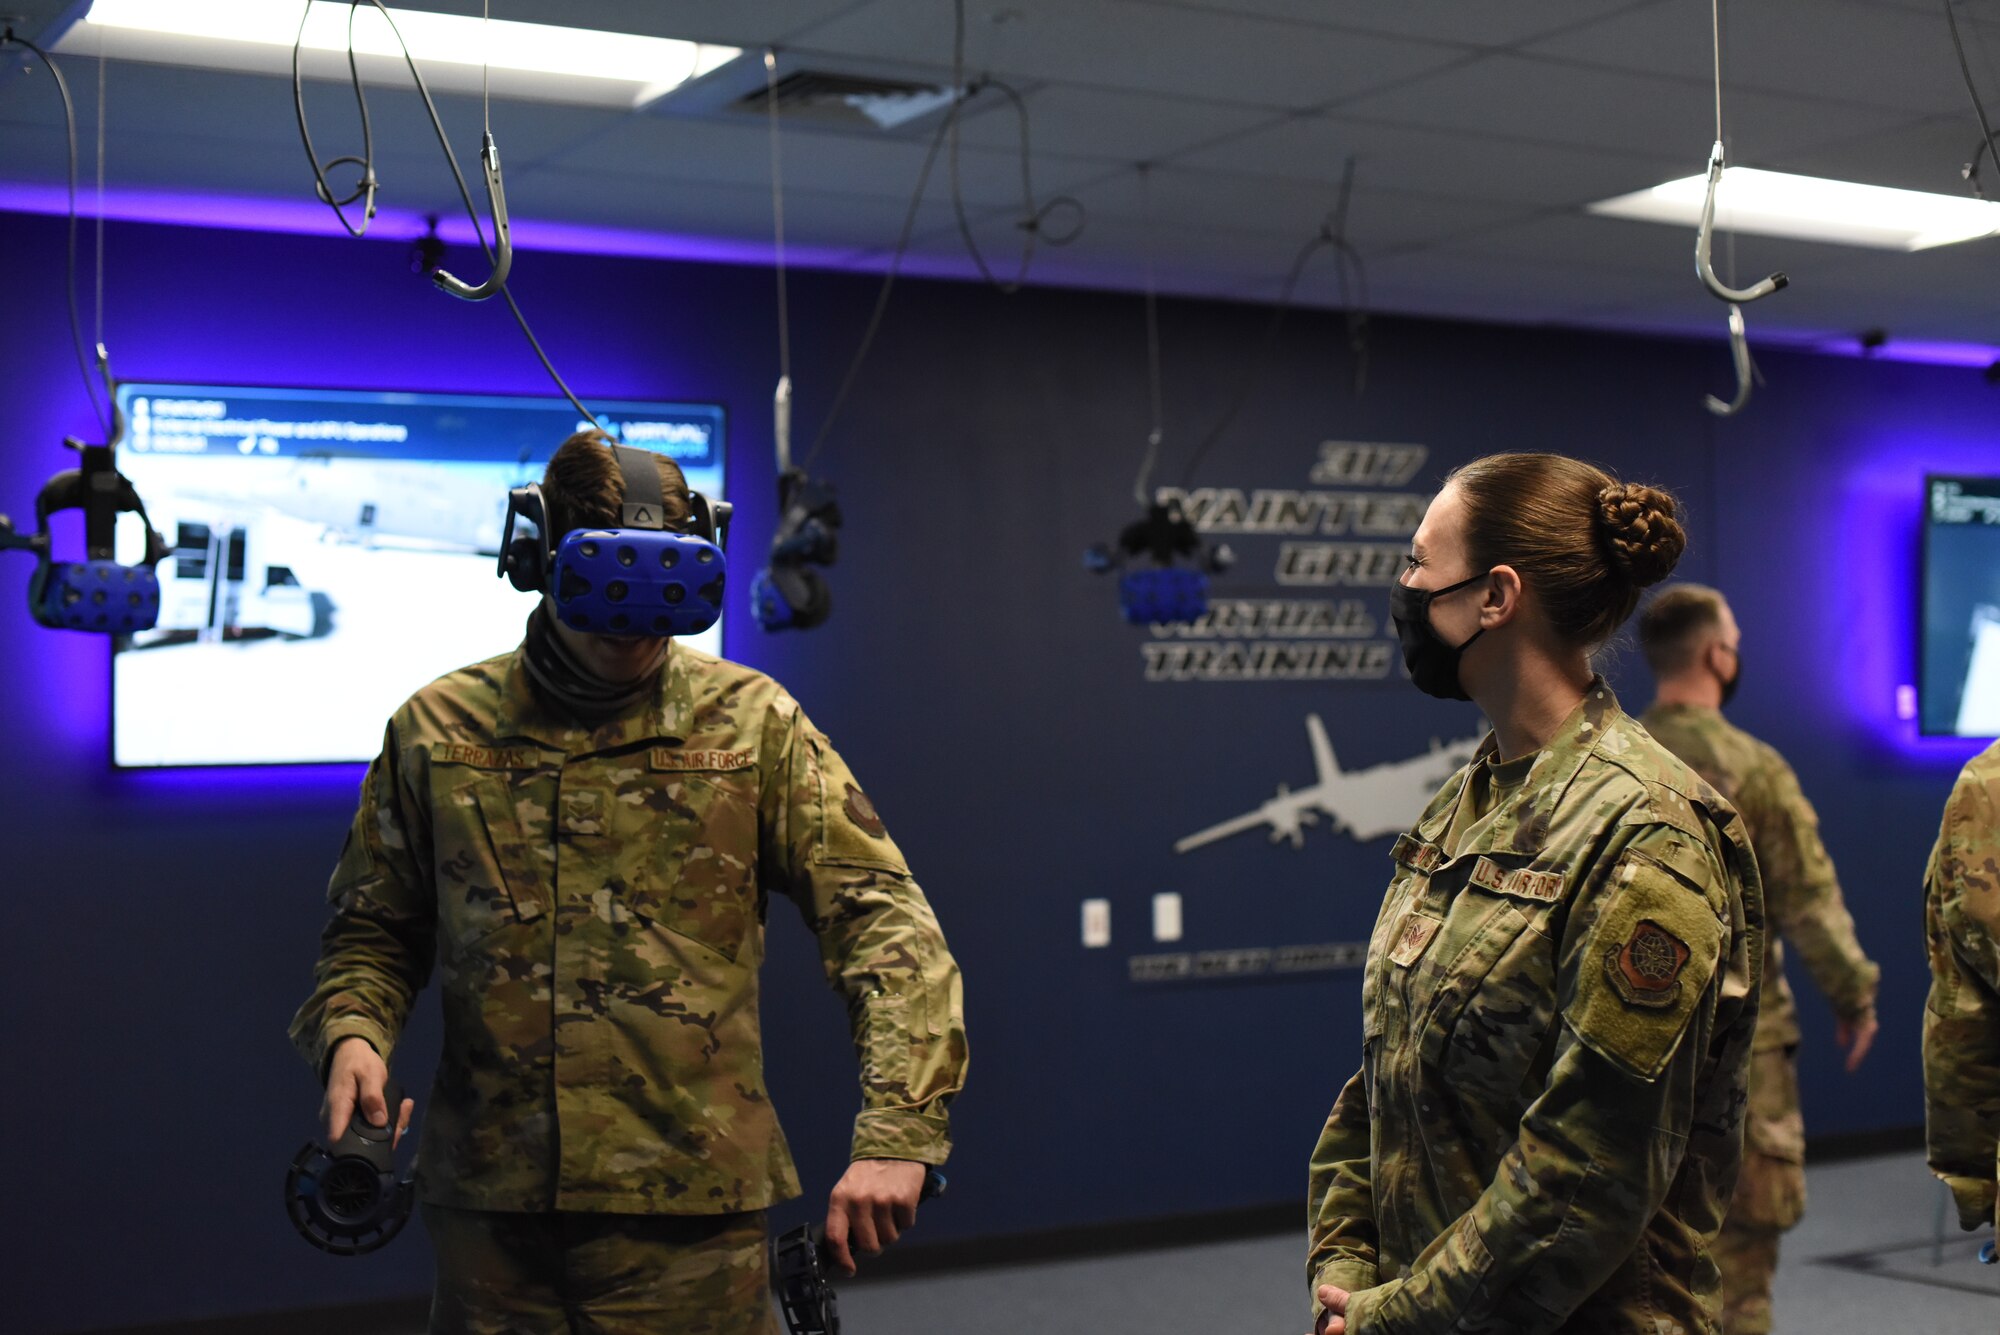 C-130 instructor provides feedback to Airmen during virtual reality training